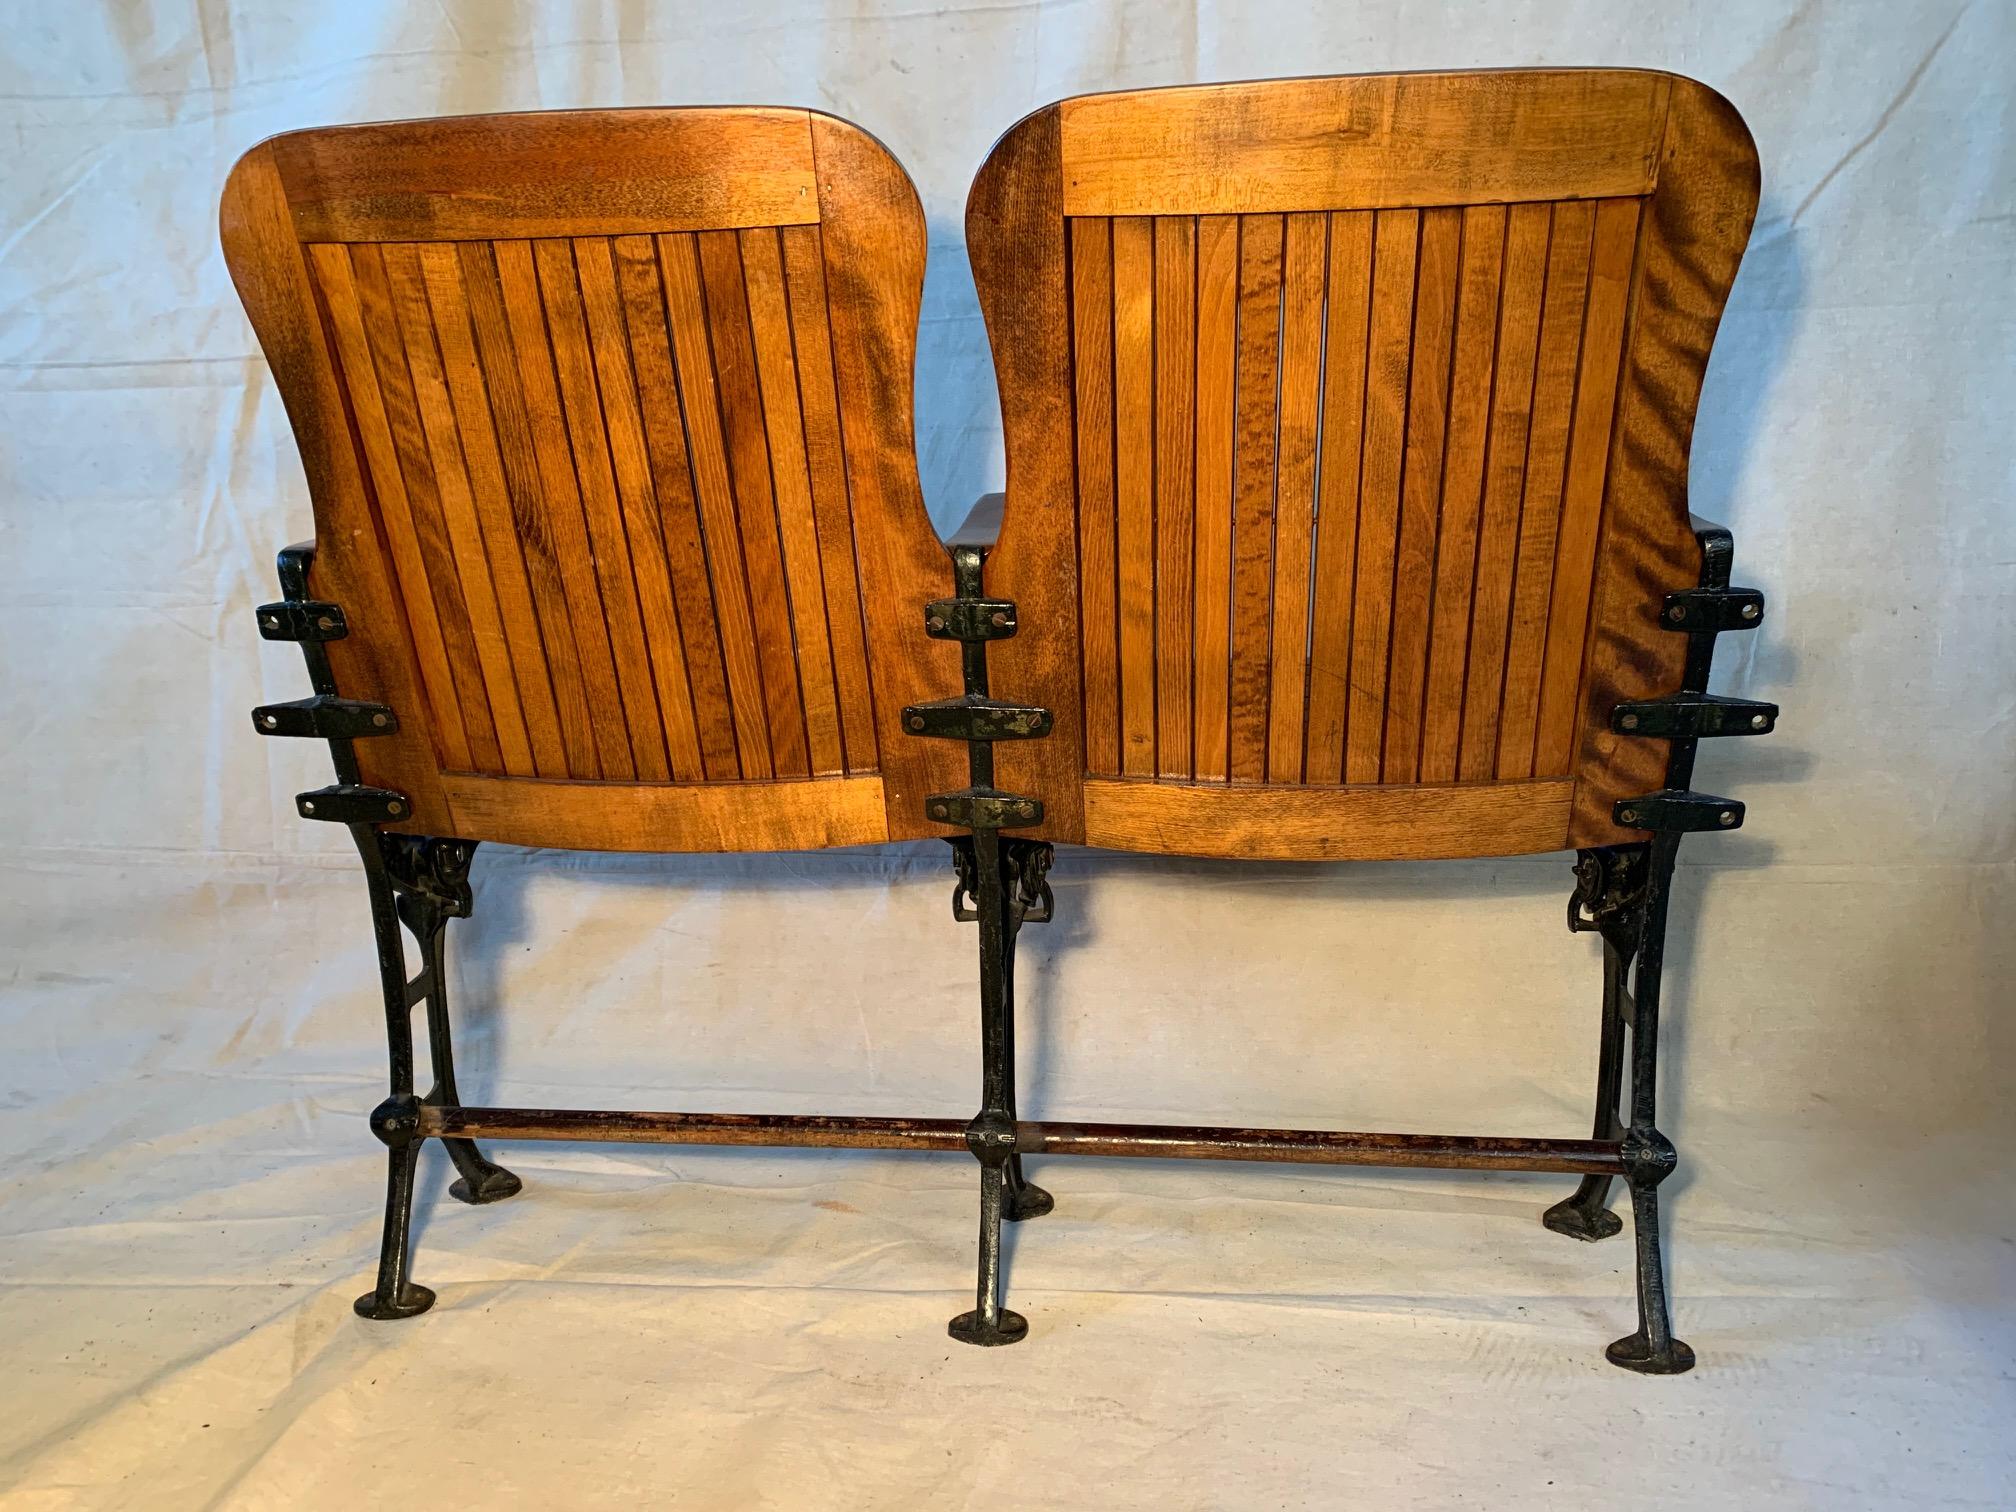 North American Early 20th Century Double Seat Folding Theater Chairs, circa 1910-1920